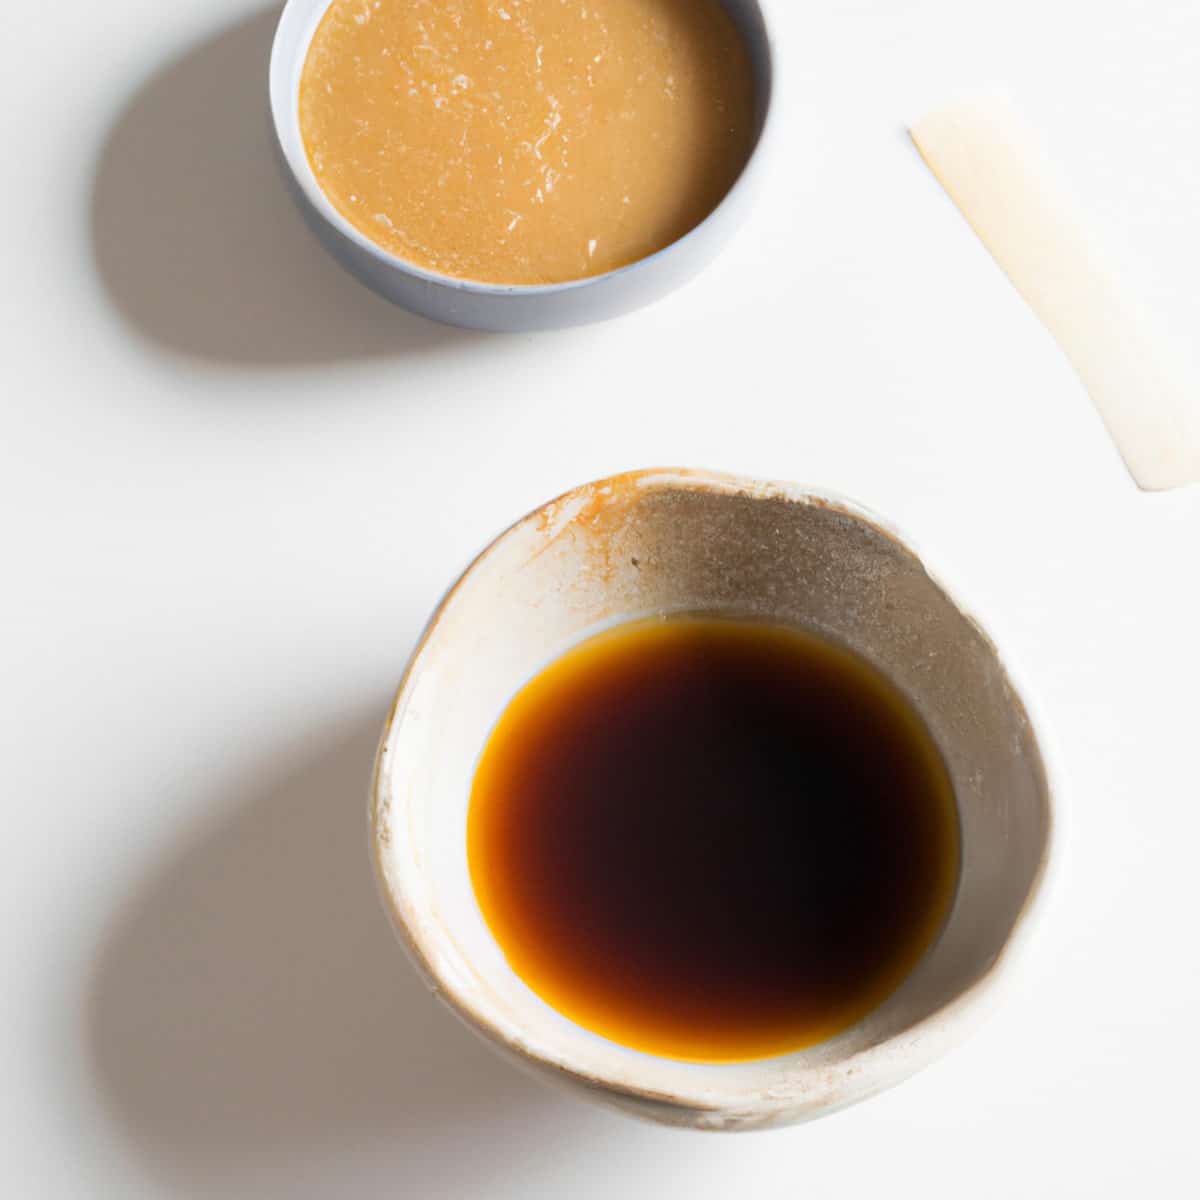 Is Dashi a Miso Paste? Don't Confuse One With The Other